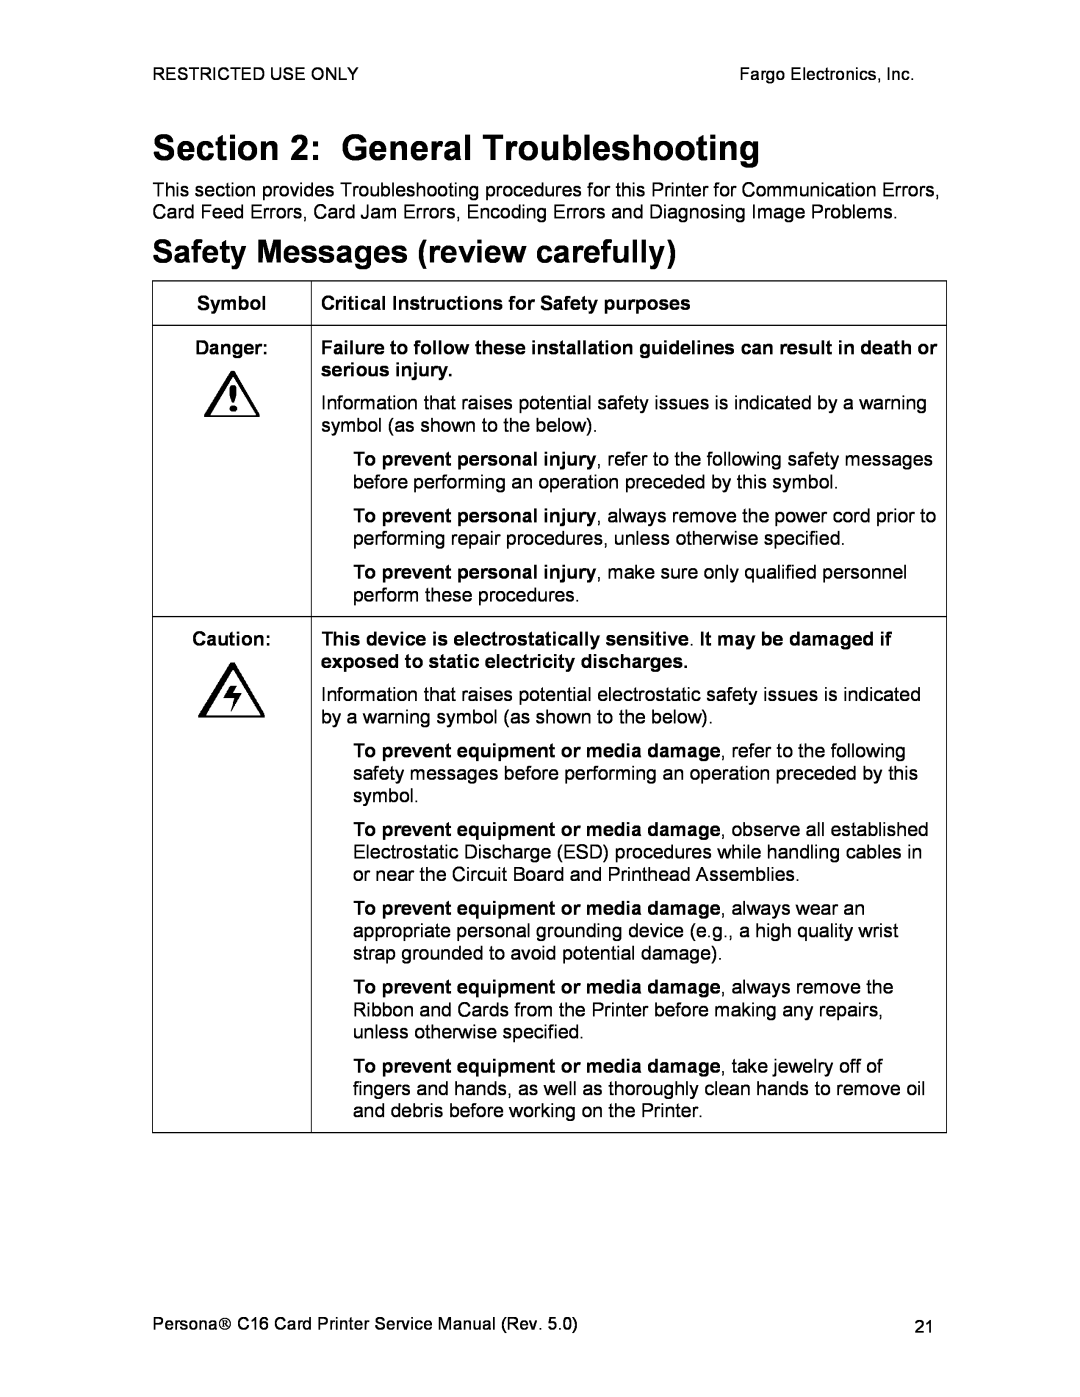 FARGO electronic C16 service manual General Troubleshooting, Safety Messages review carefully 